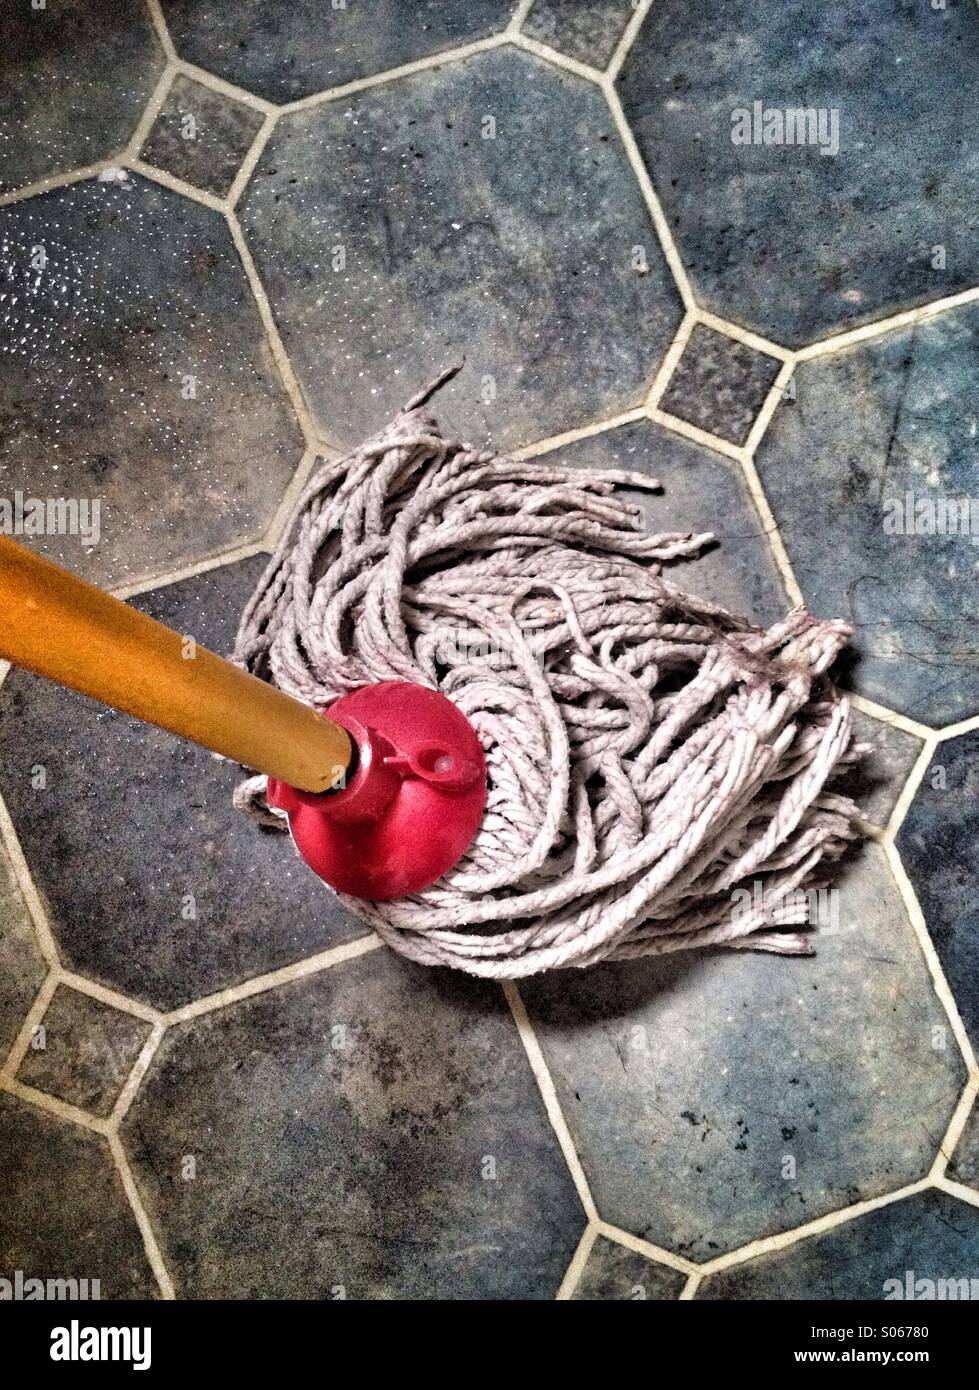 Mopping a filthy floor Stock Photo